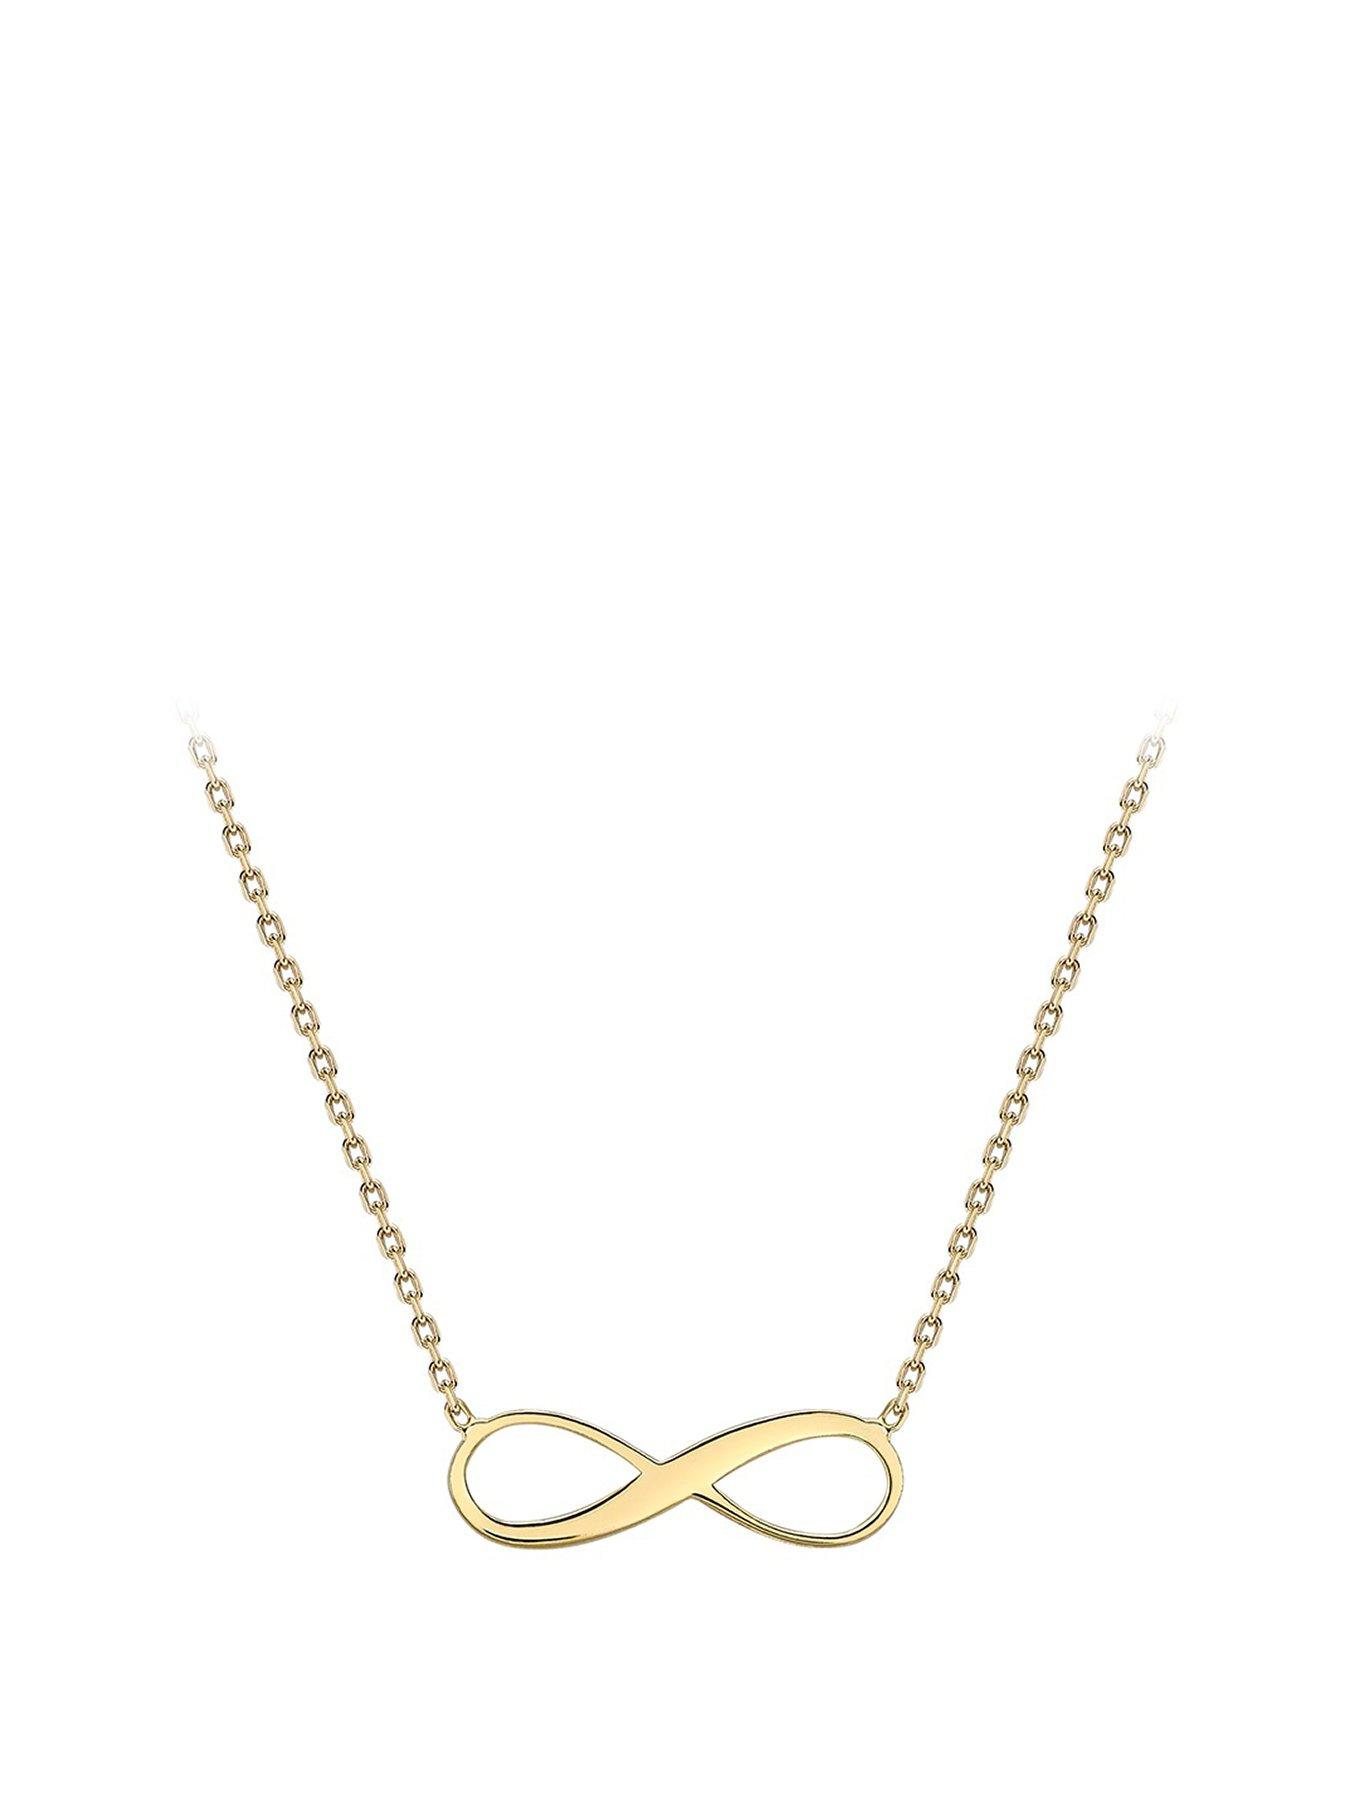 Plain | Necklaces | Gifts & jewellery | www.littlewoods.com